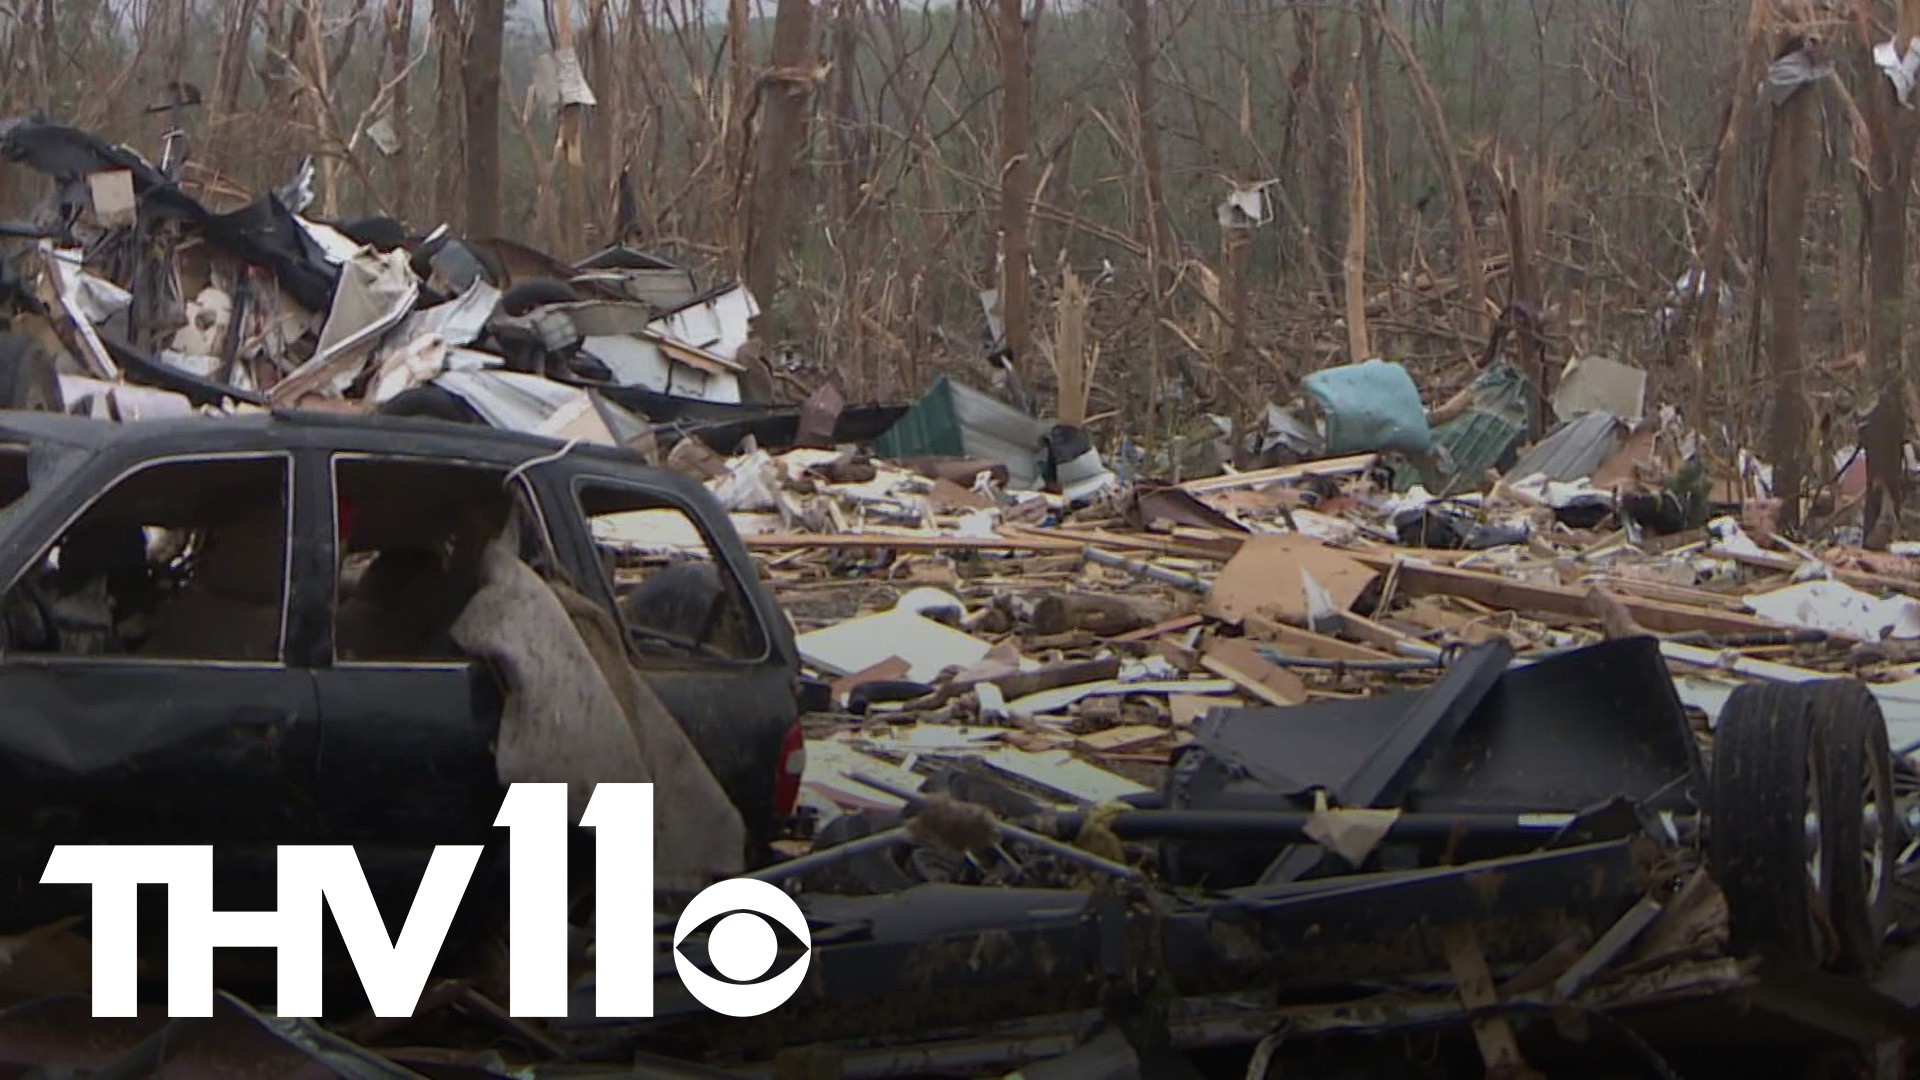 Tom Brannon and Marlisa Goldsmith remember the devastating and deadly 2014 tornado that came through Arkansas.